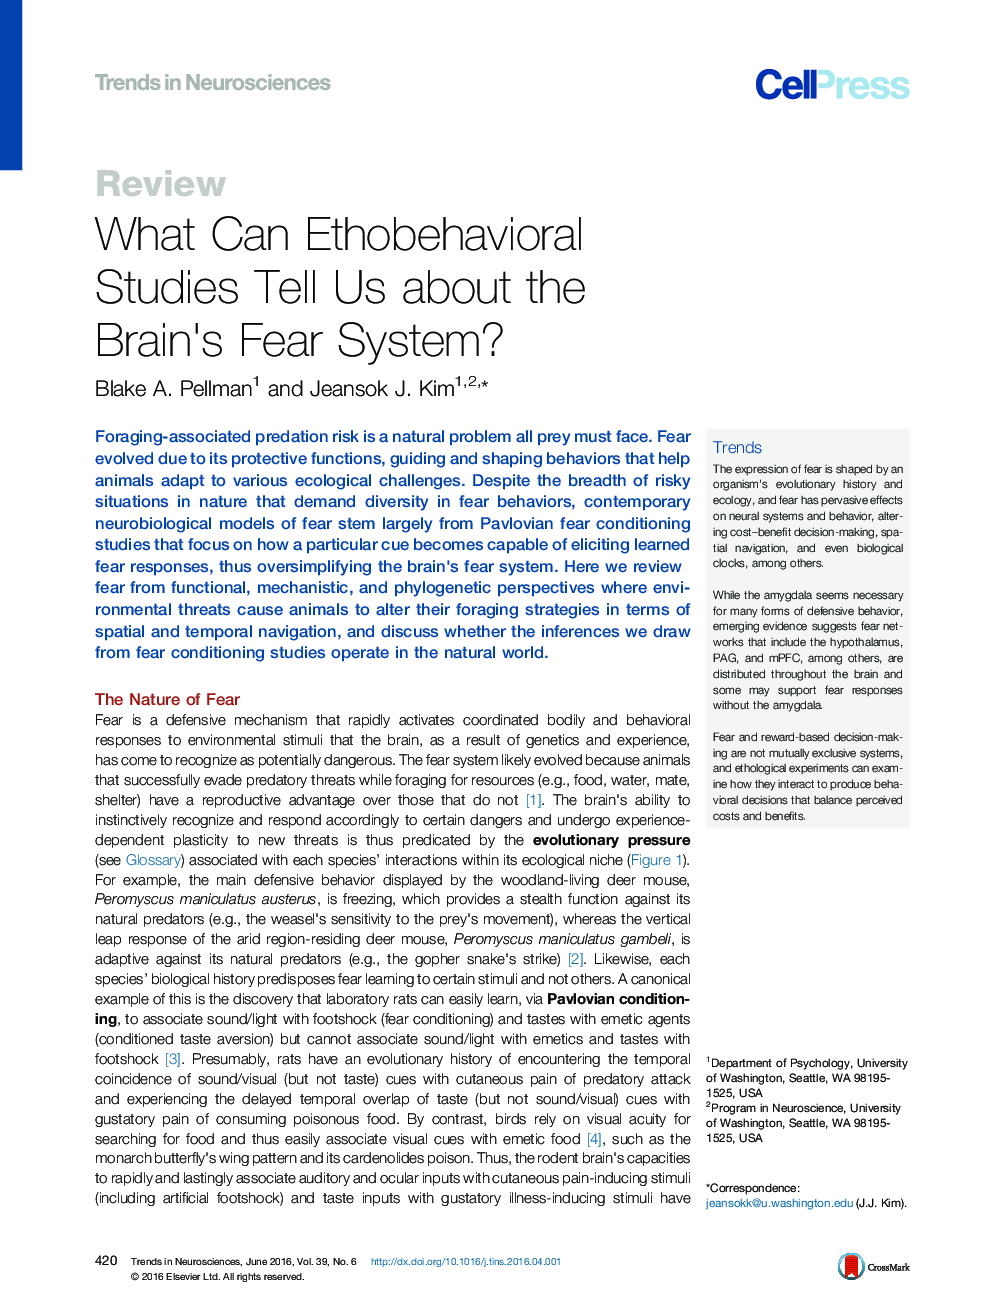 What Can Ethobehavioral Studies Tell Us about the Brain's Fear System?